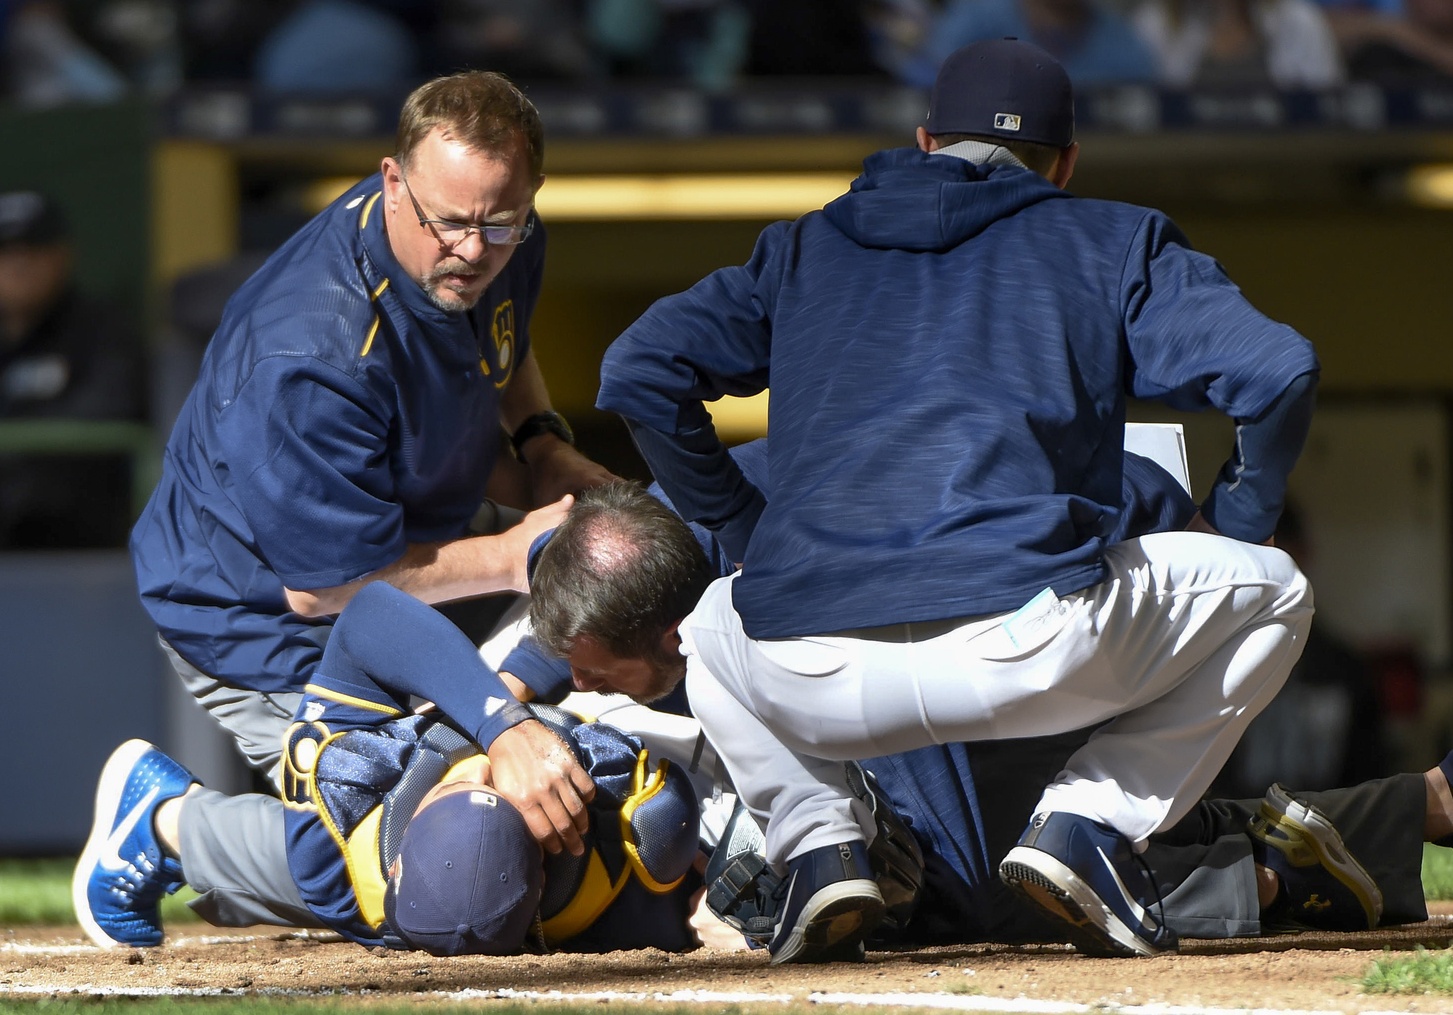 Apr 1, 2017; Milwaukee, WI, USA; Milwaukee Brewers catcher Jett Bandy (47) checks on Rene Garcia after Garcia was injured in the ninth inning during the game against the Chicago White Sox and had to be carted off the field at Miller Park. Mandatory Credit: Benny Sieu-USA TODAY Sports